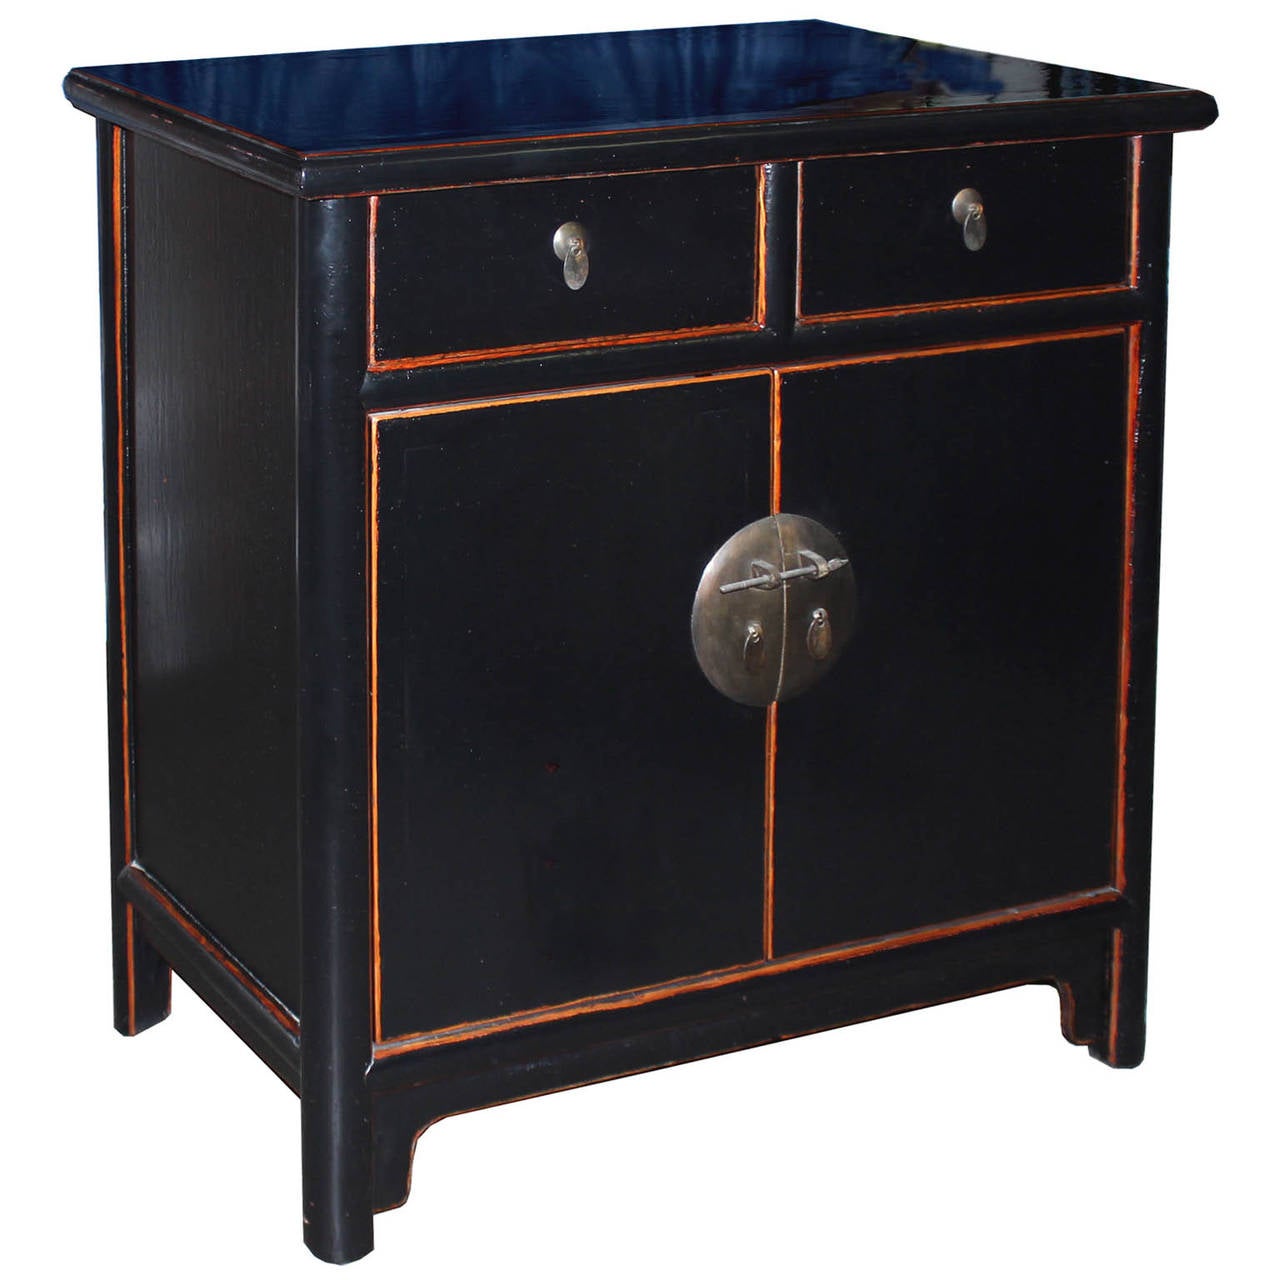 Two-drawer black lacquer side chest with exposed wood edges and straight bottom skirt. New interior shelf and hardware, China, circa 1920s. Some wear.